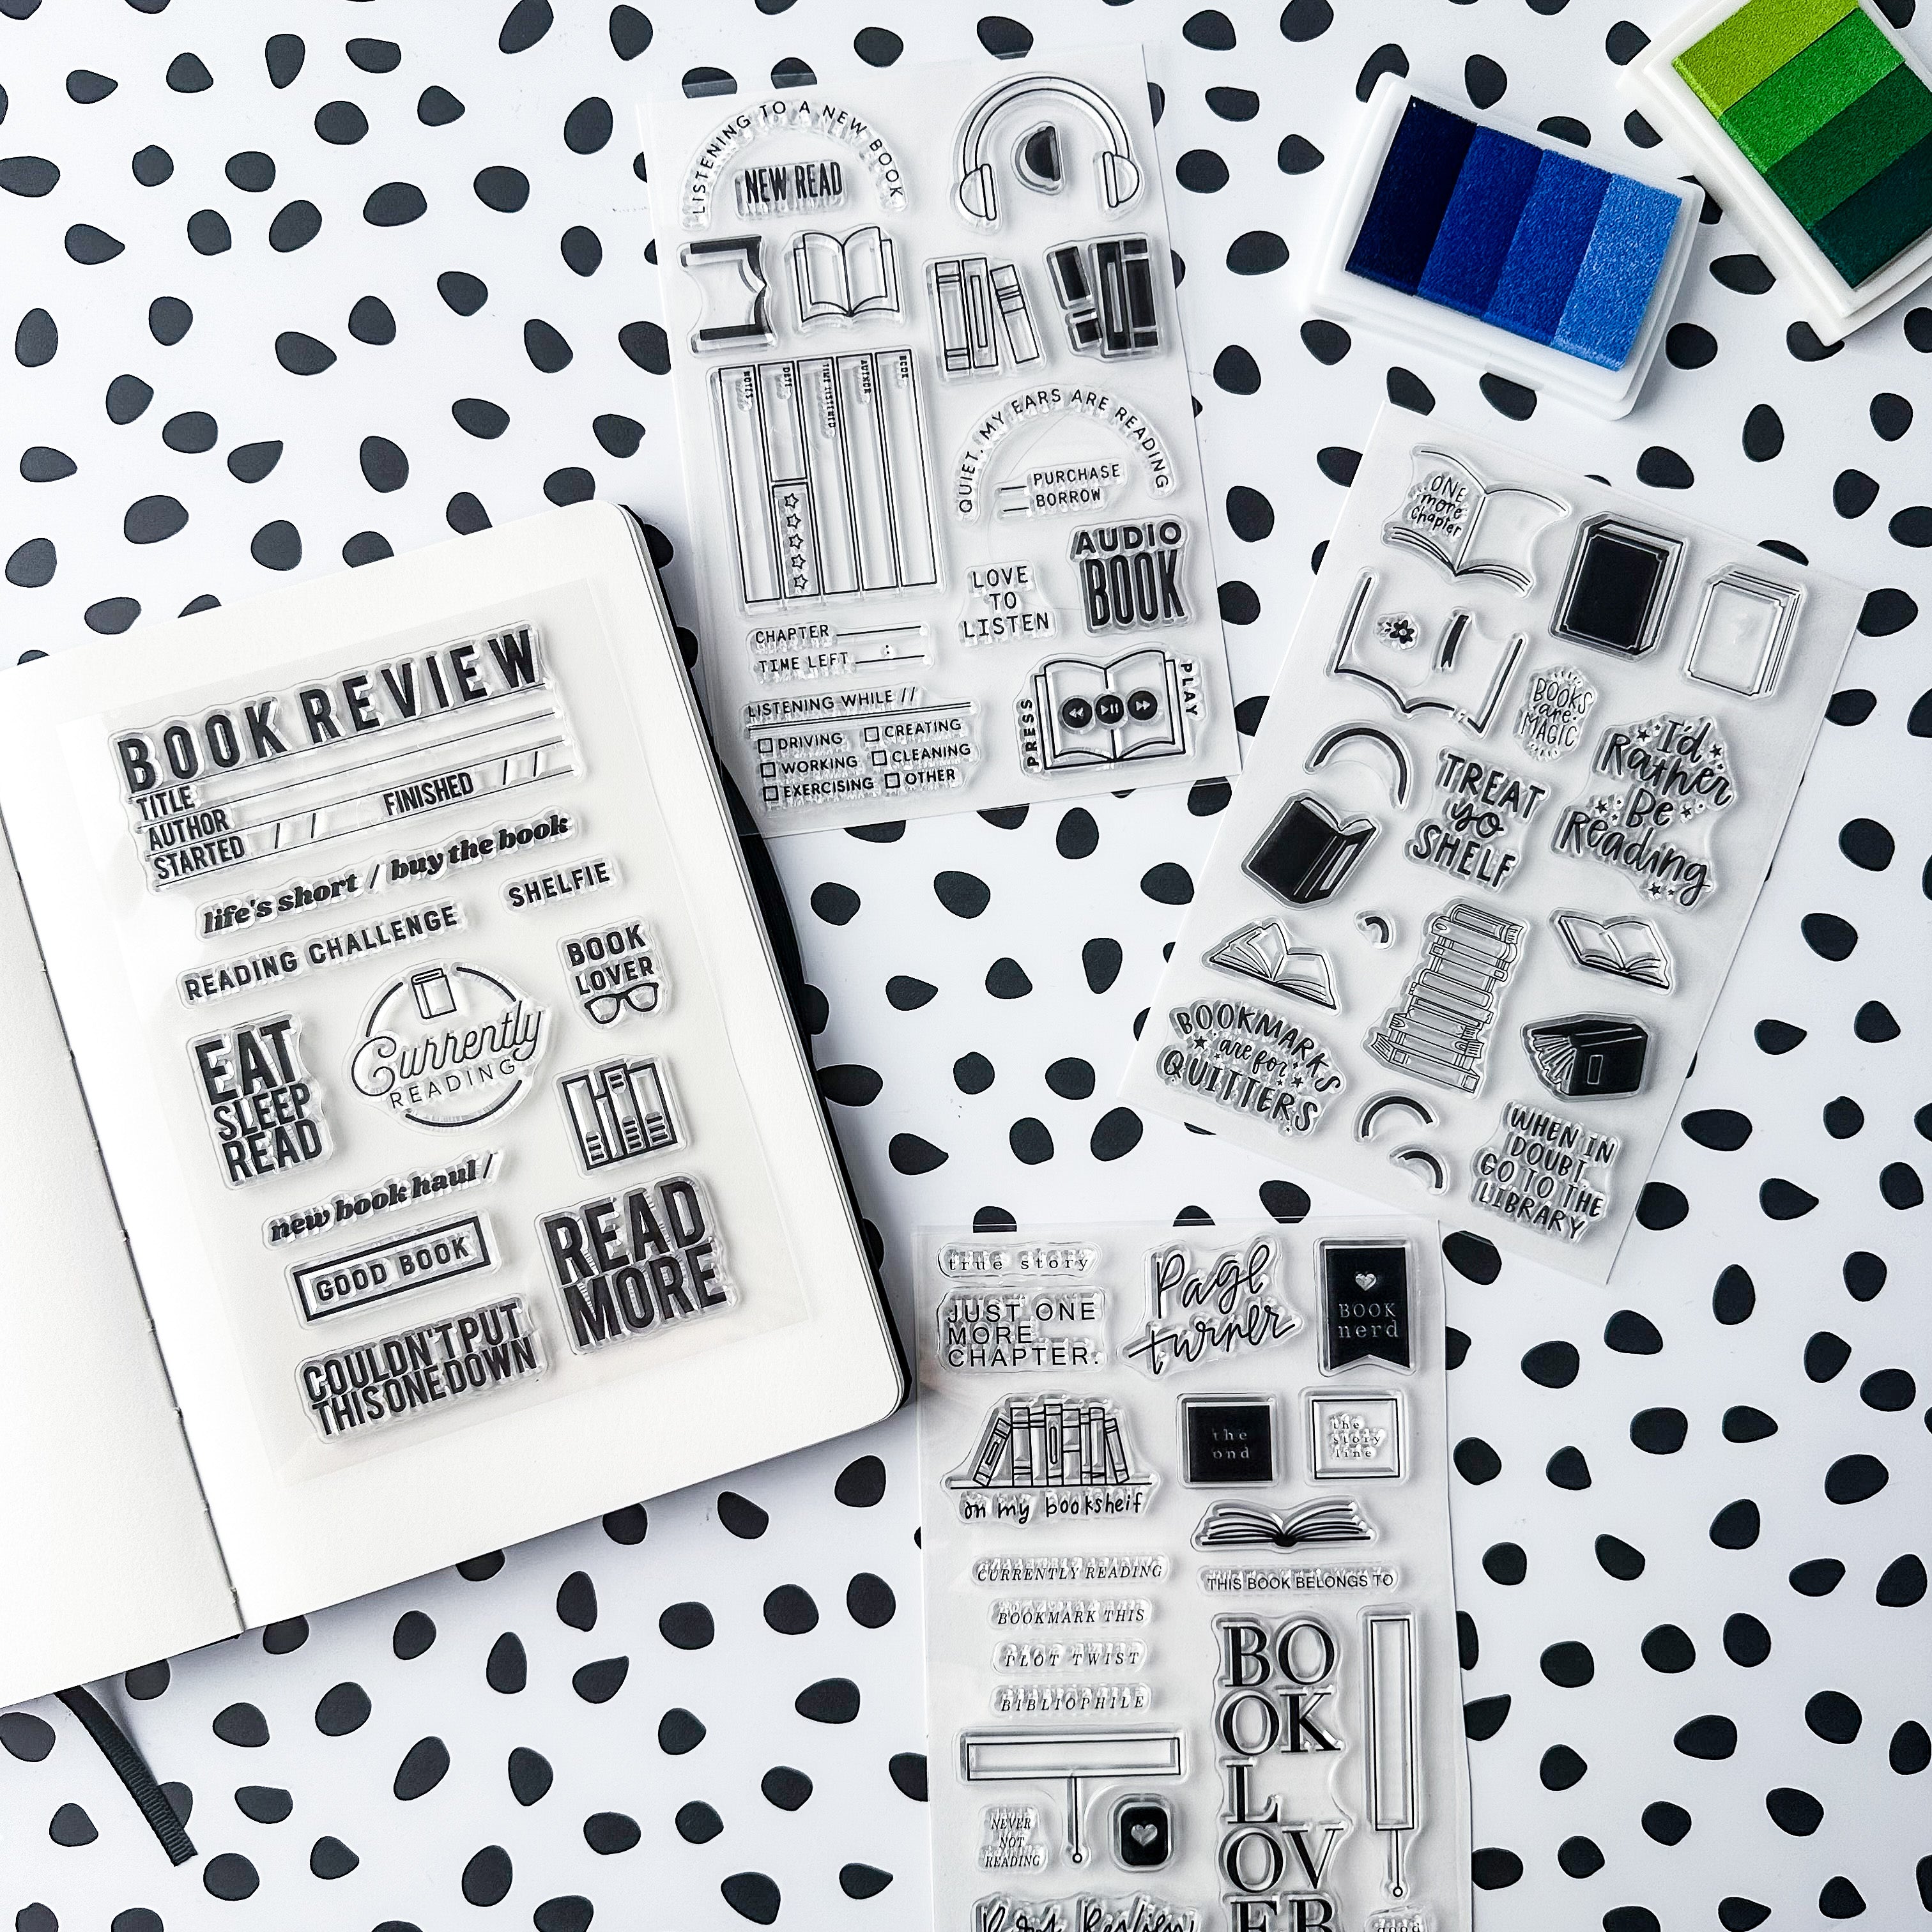 Organize your reading life with these handy stamps! Keep track of books you've read, rate them, jot down key points, and more. Perfect for book lovers who want to create a personalized reading log in their planner or journal. These stamps are sold at BBB Supplies Craft Shop.